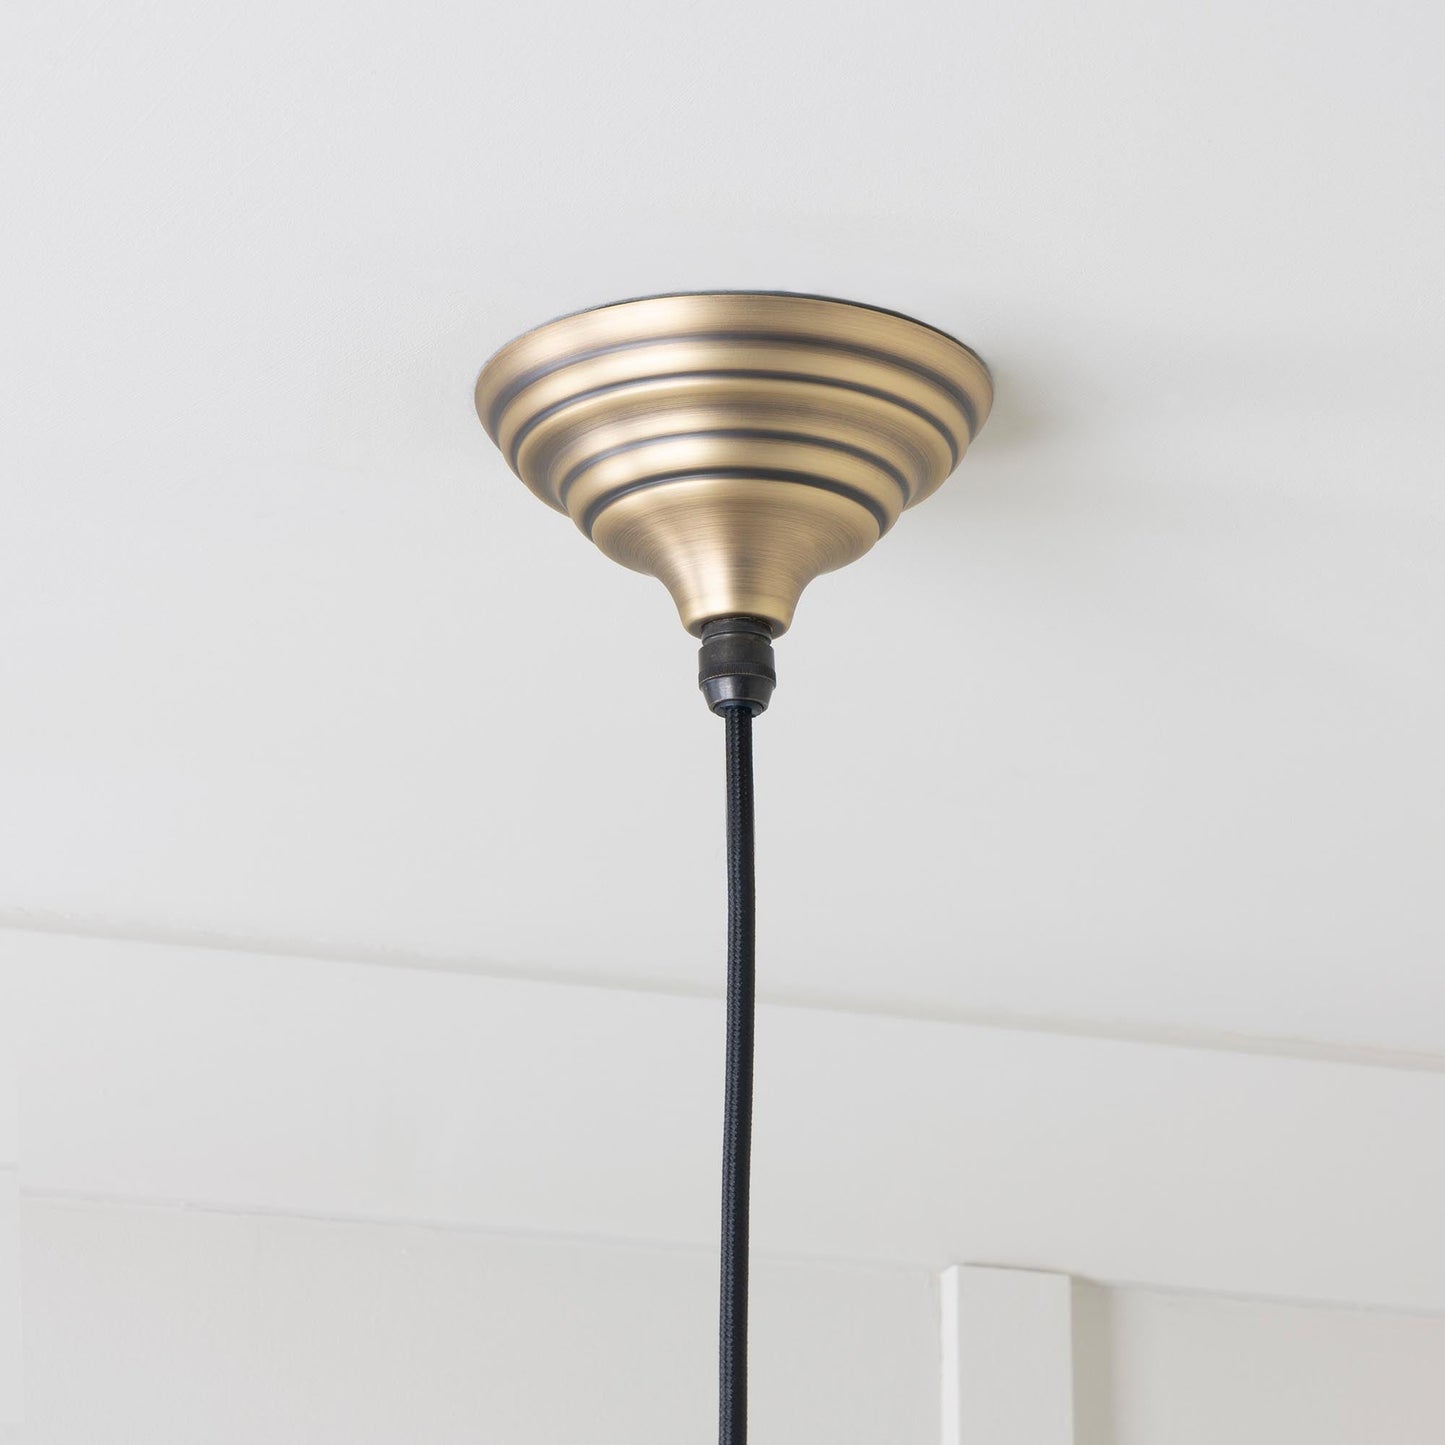 Aged Brass Harborne Pendant Light, close up view of fitting and cable.